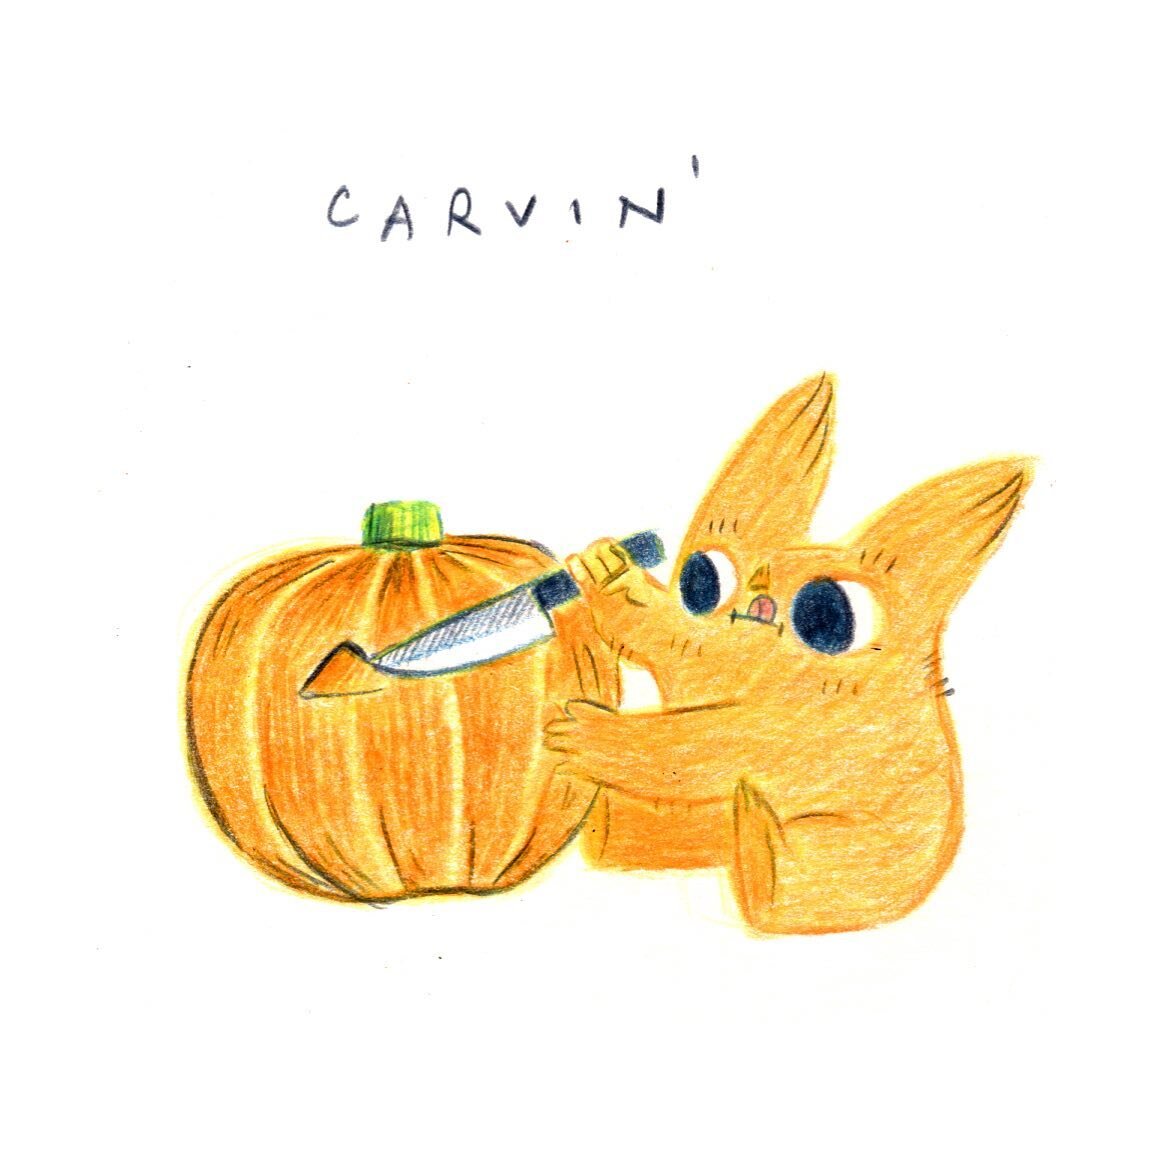 Pumpkin therapy for all!
.
As we draw closer to All Hallows Eve get cosy with a pumpkin and a coffeen and perhaps a ghost pal at your local neighbourhood Medicine Shoppe 🎃
.
.
.
.
#goblins #comics #coffee #edinburgh #edinburghcoffeeshop #edinburghco